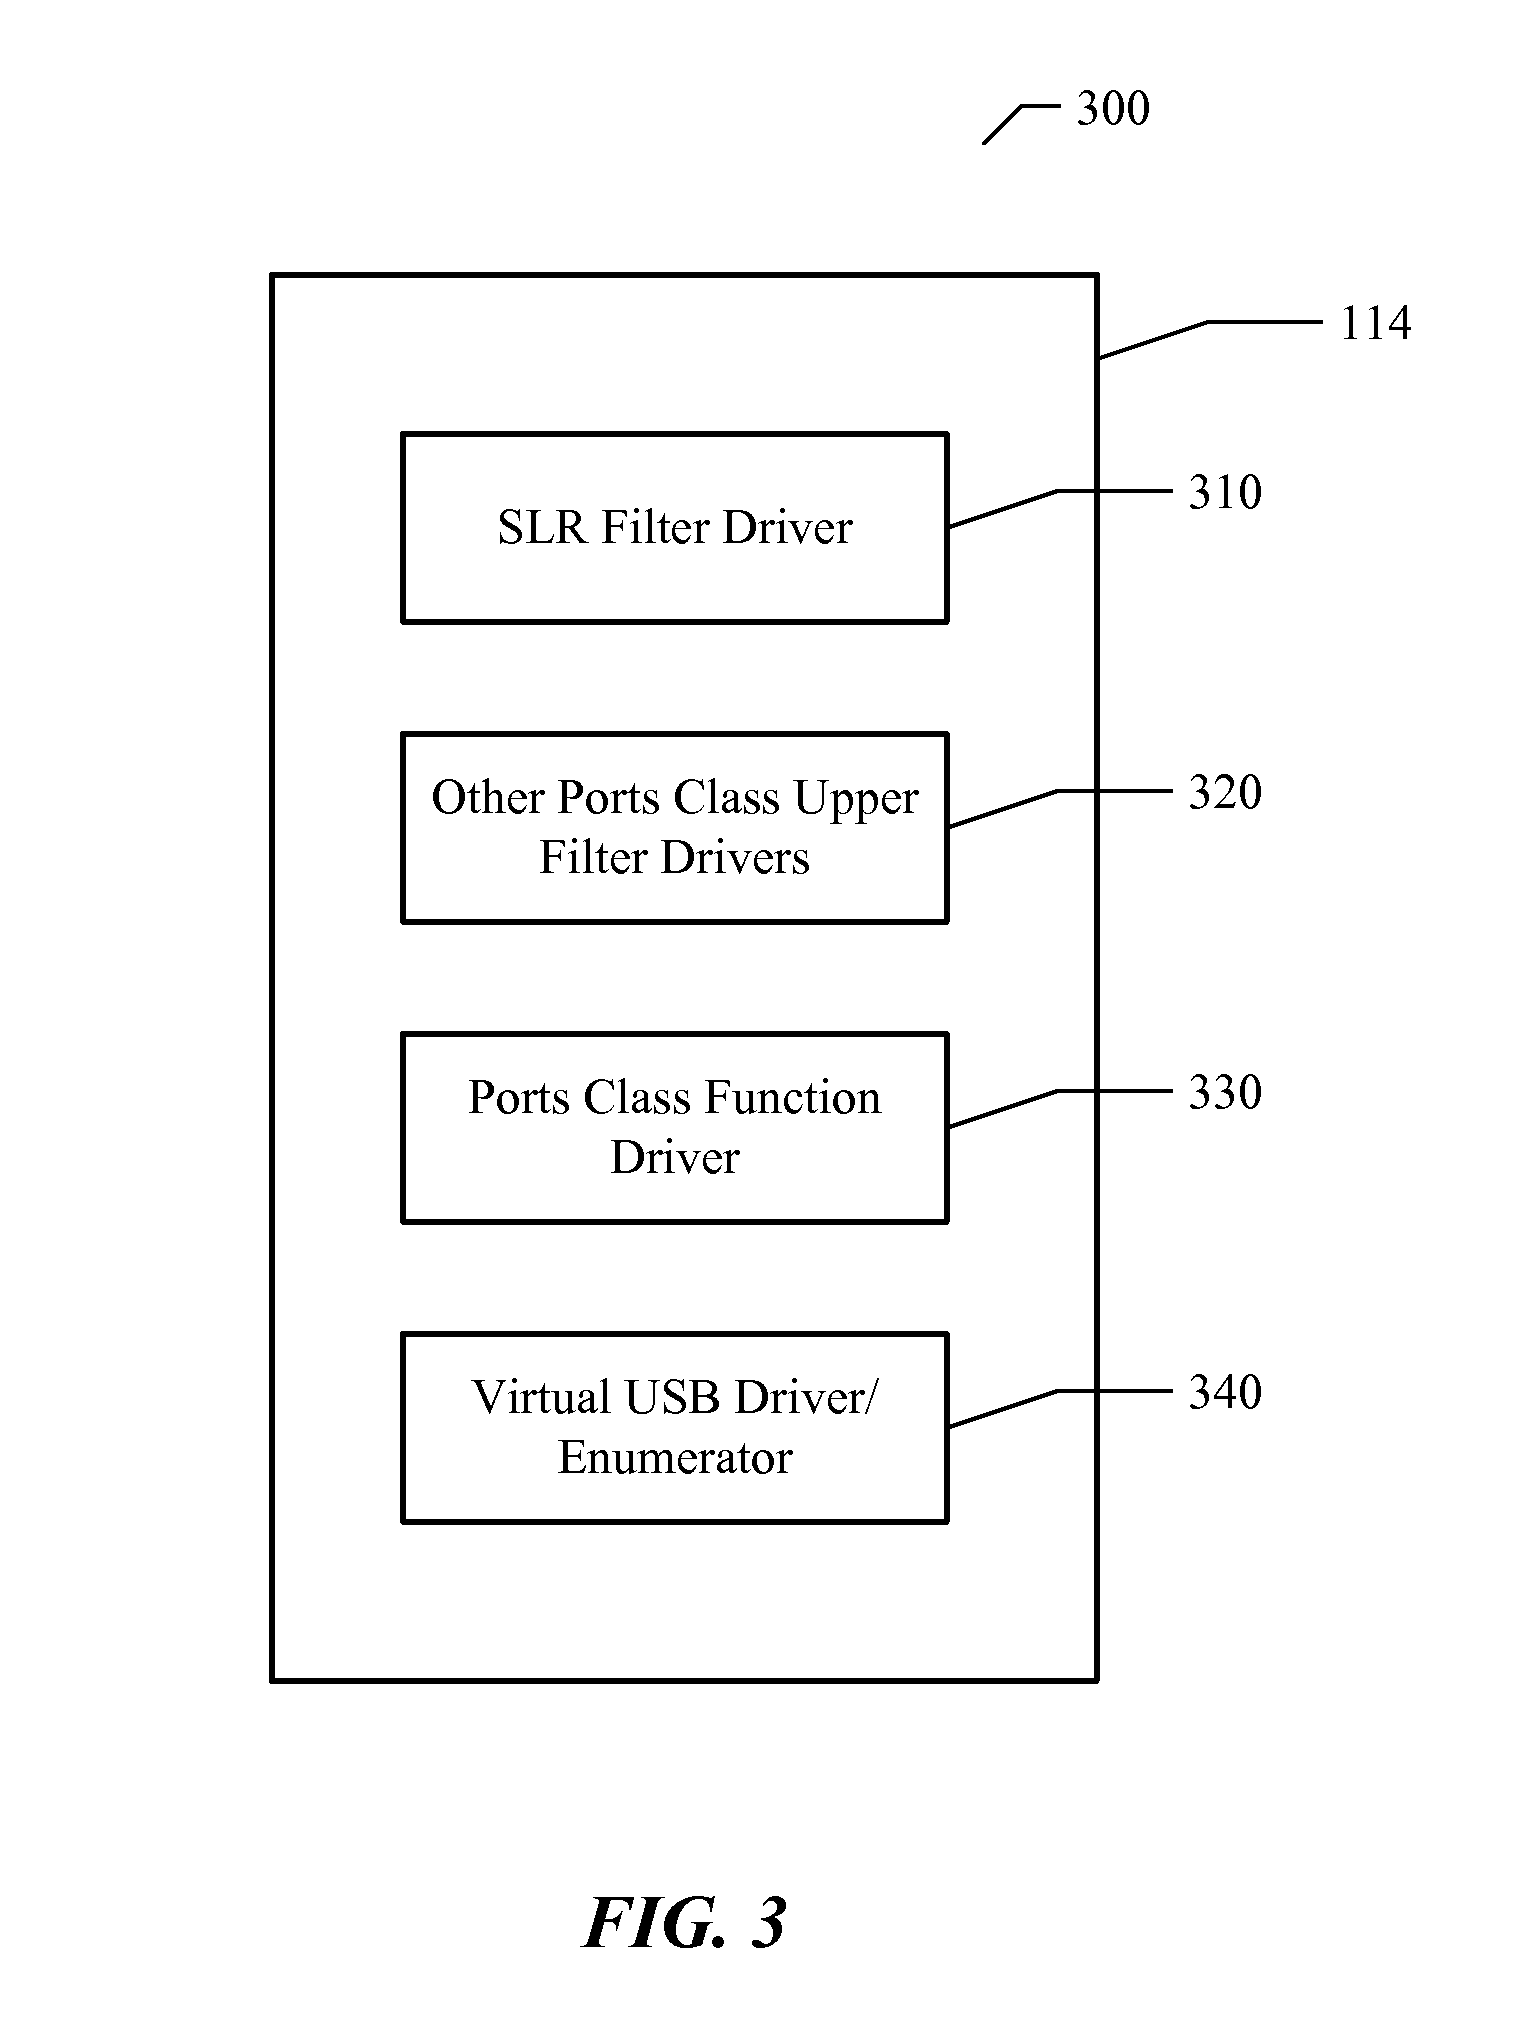 Systems and methods for providing protocol independent disjoint port names